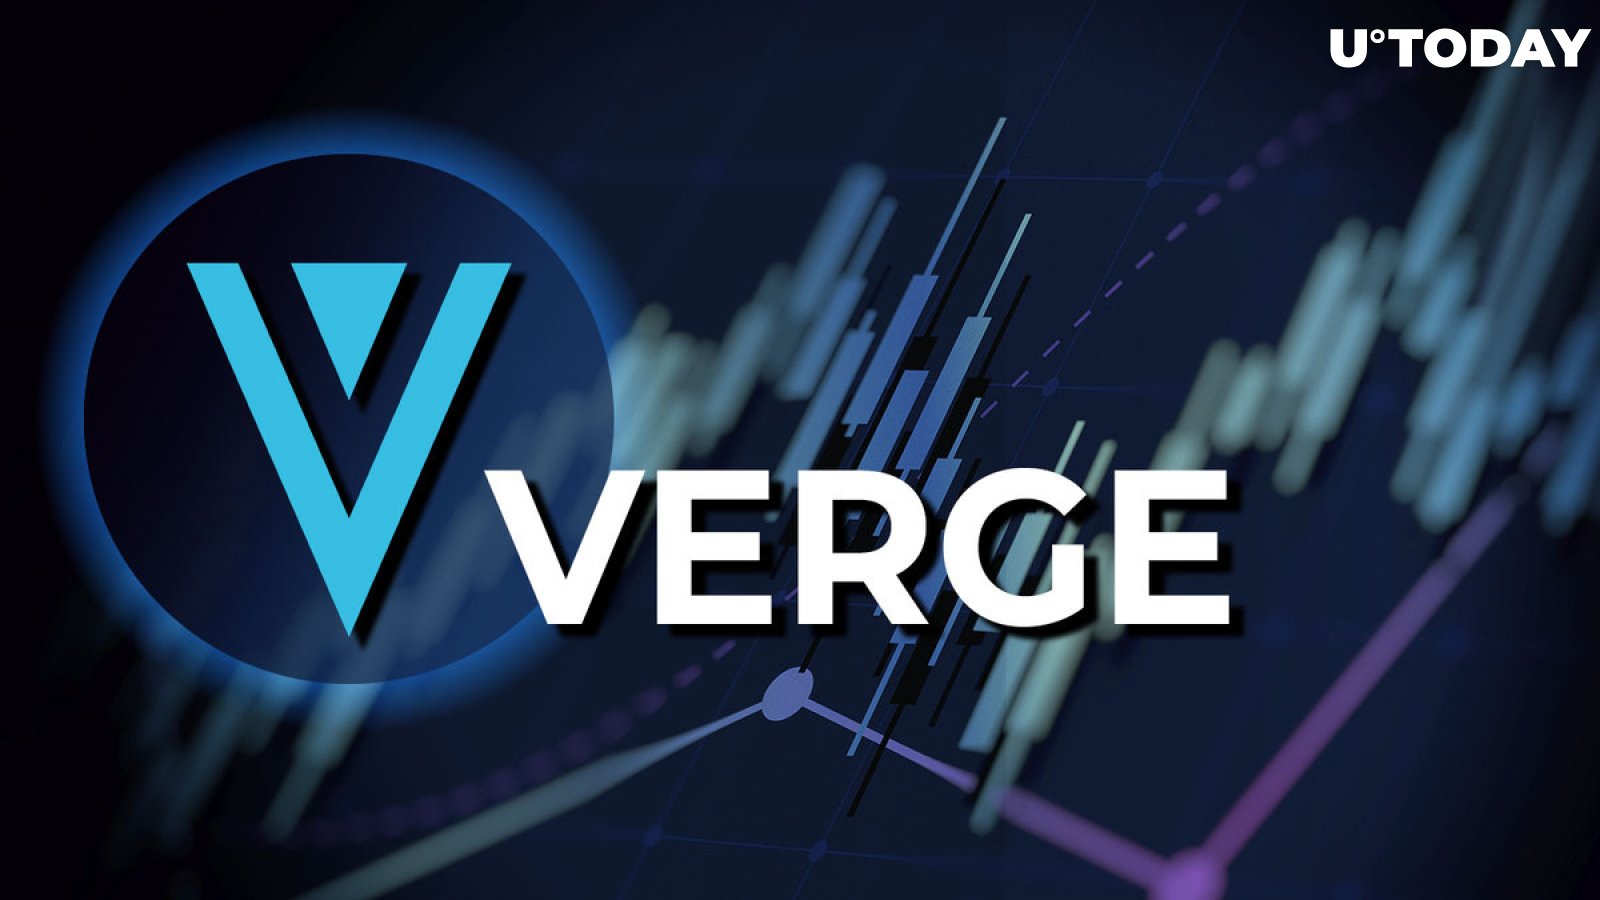 Verge (XVG) Jumps 15%, Here Are 3 Reasons Why